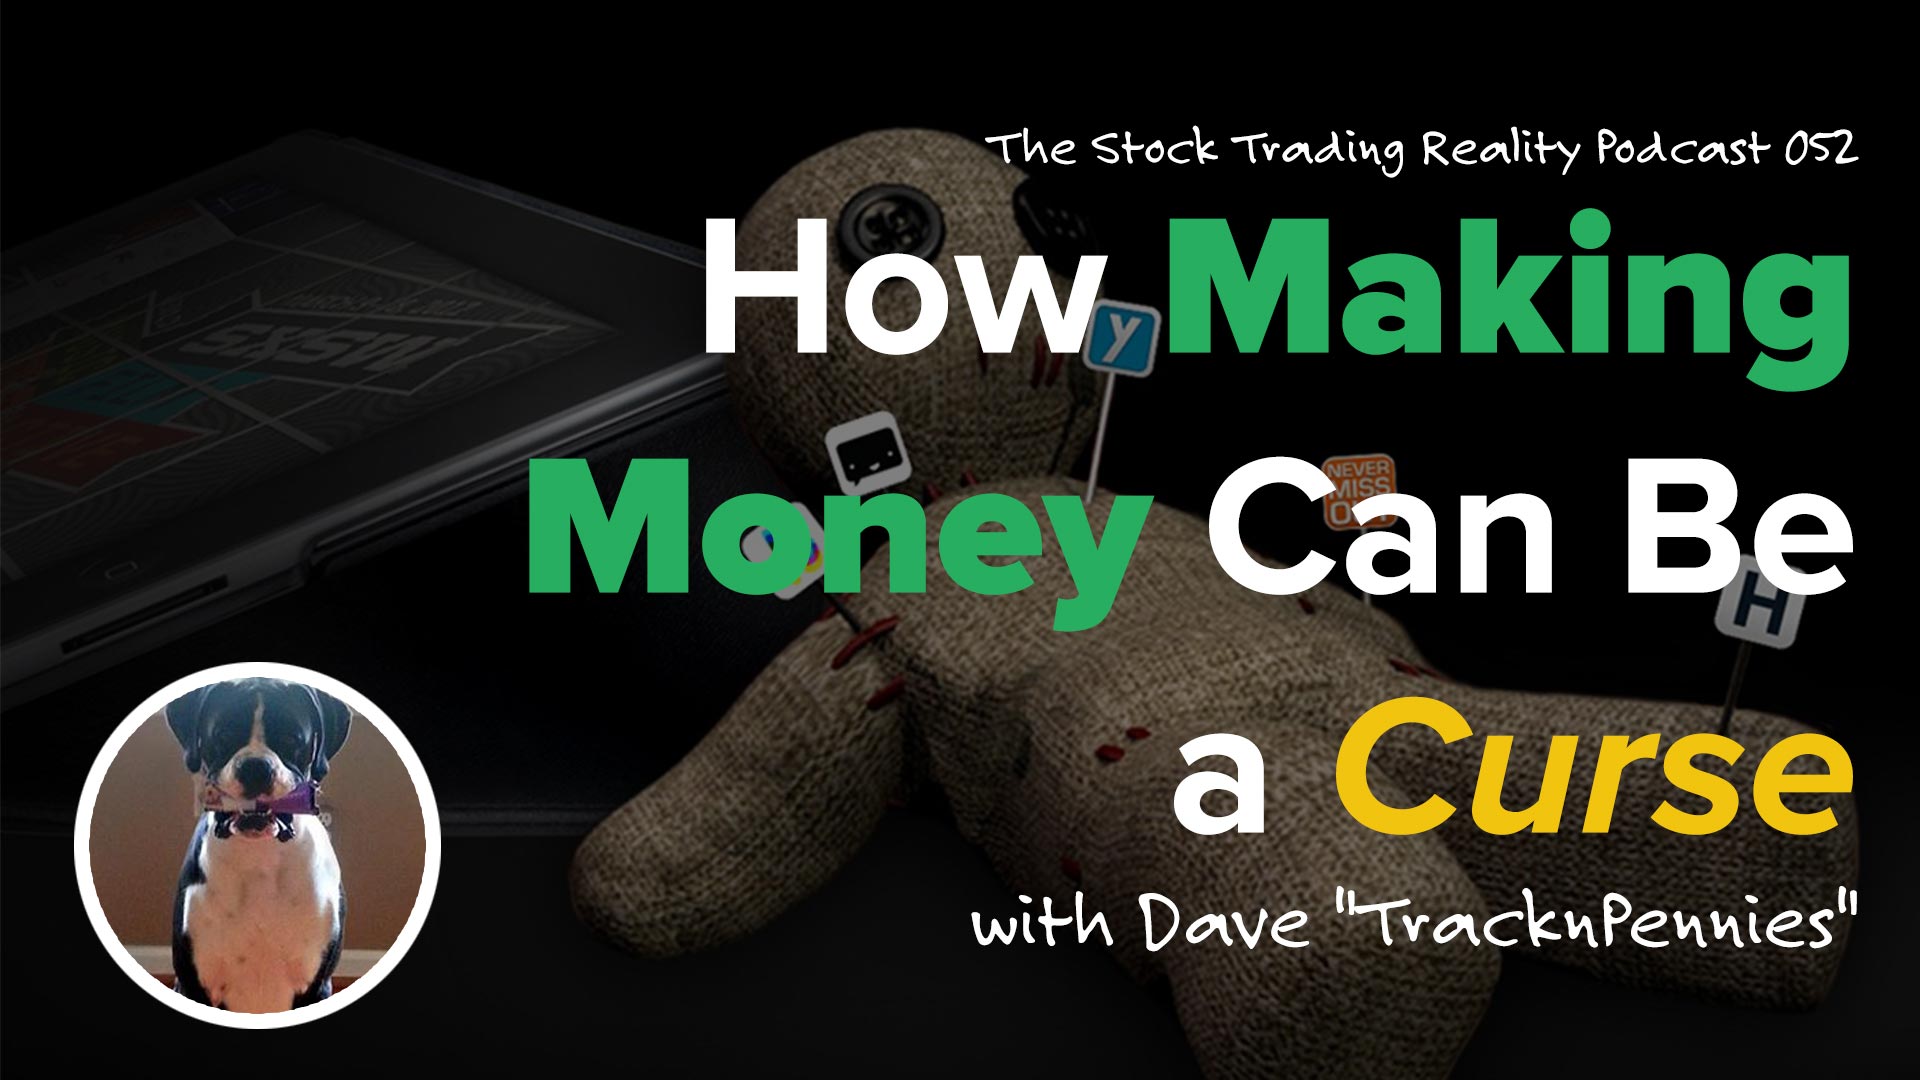 STR 052: How Making Money Can Be a Curse